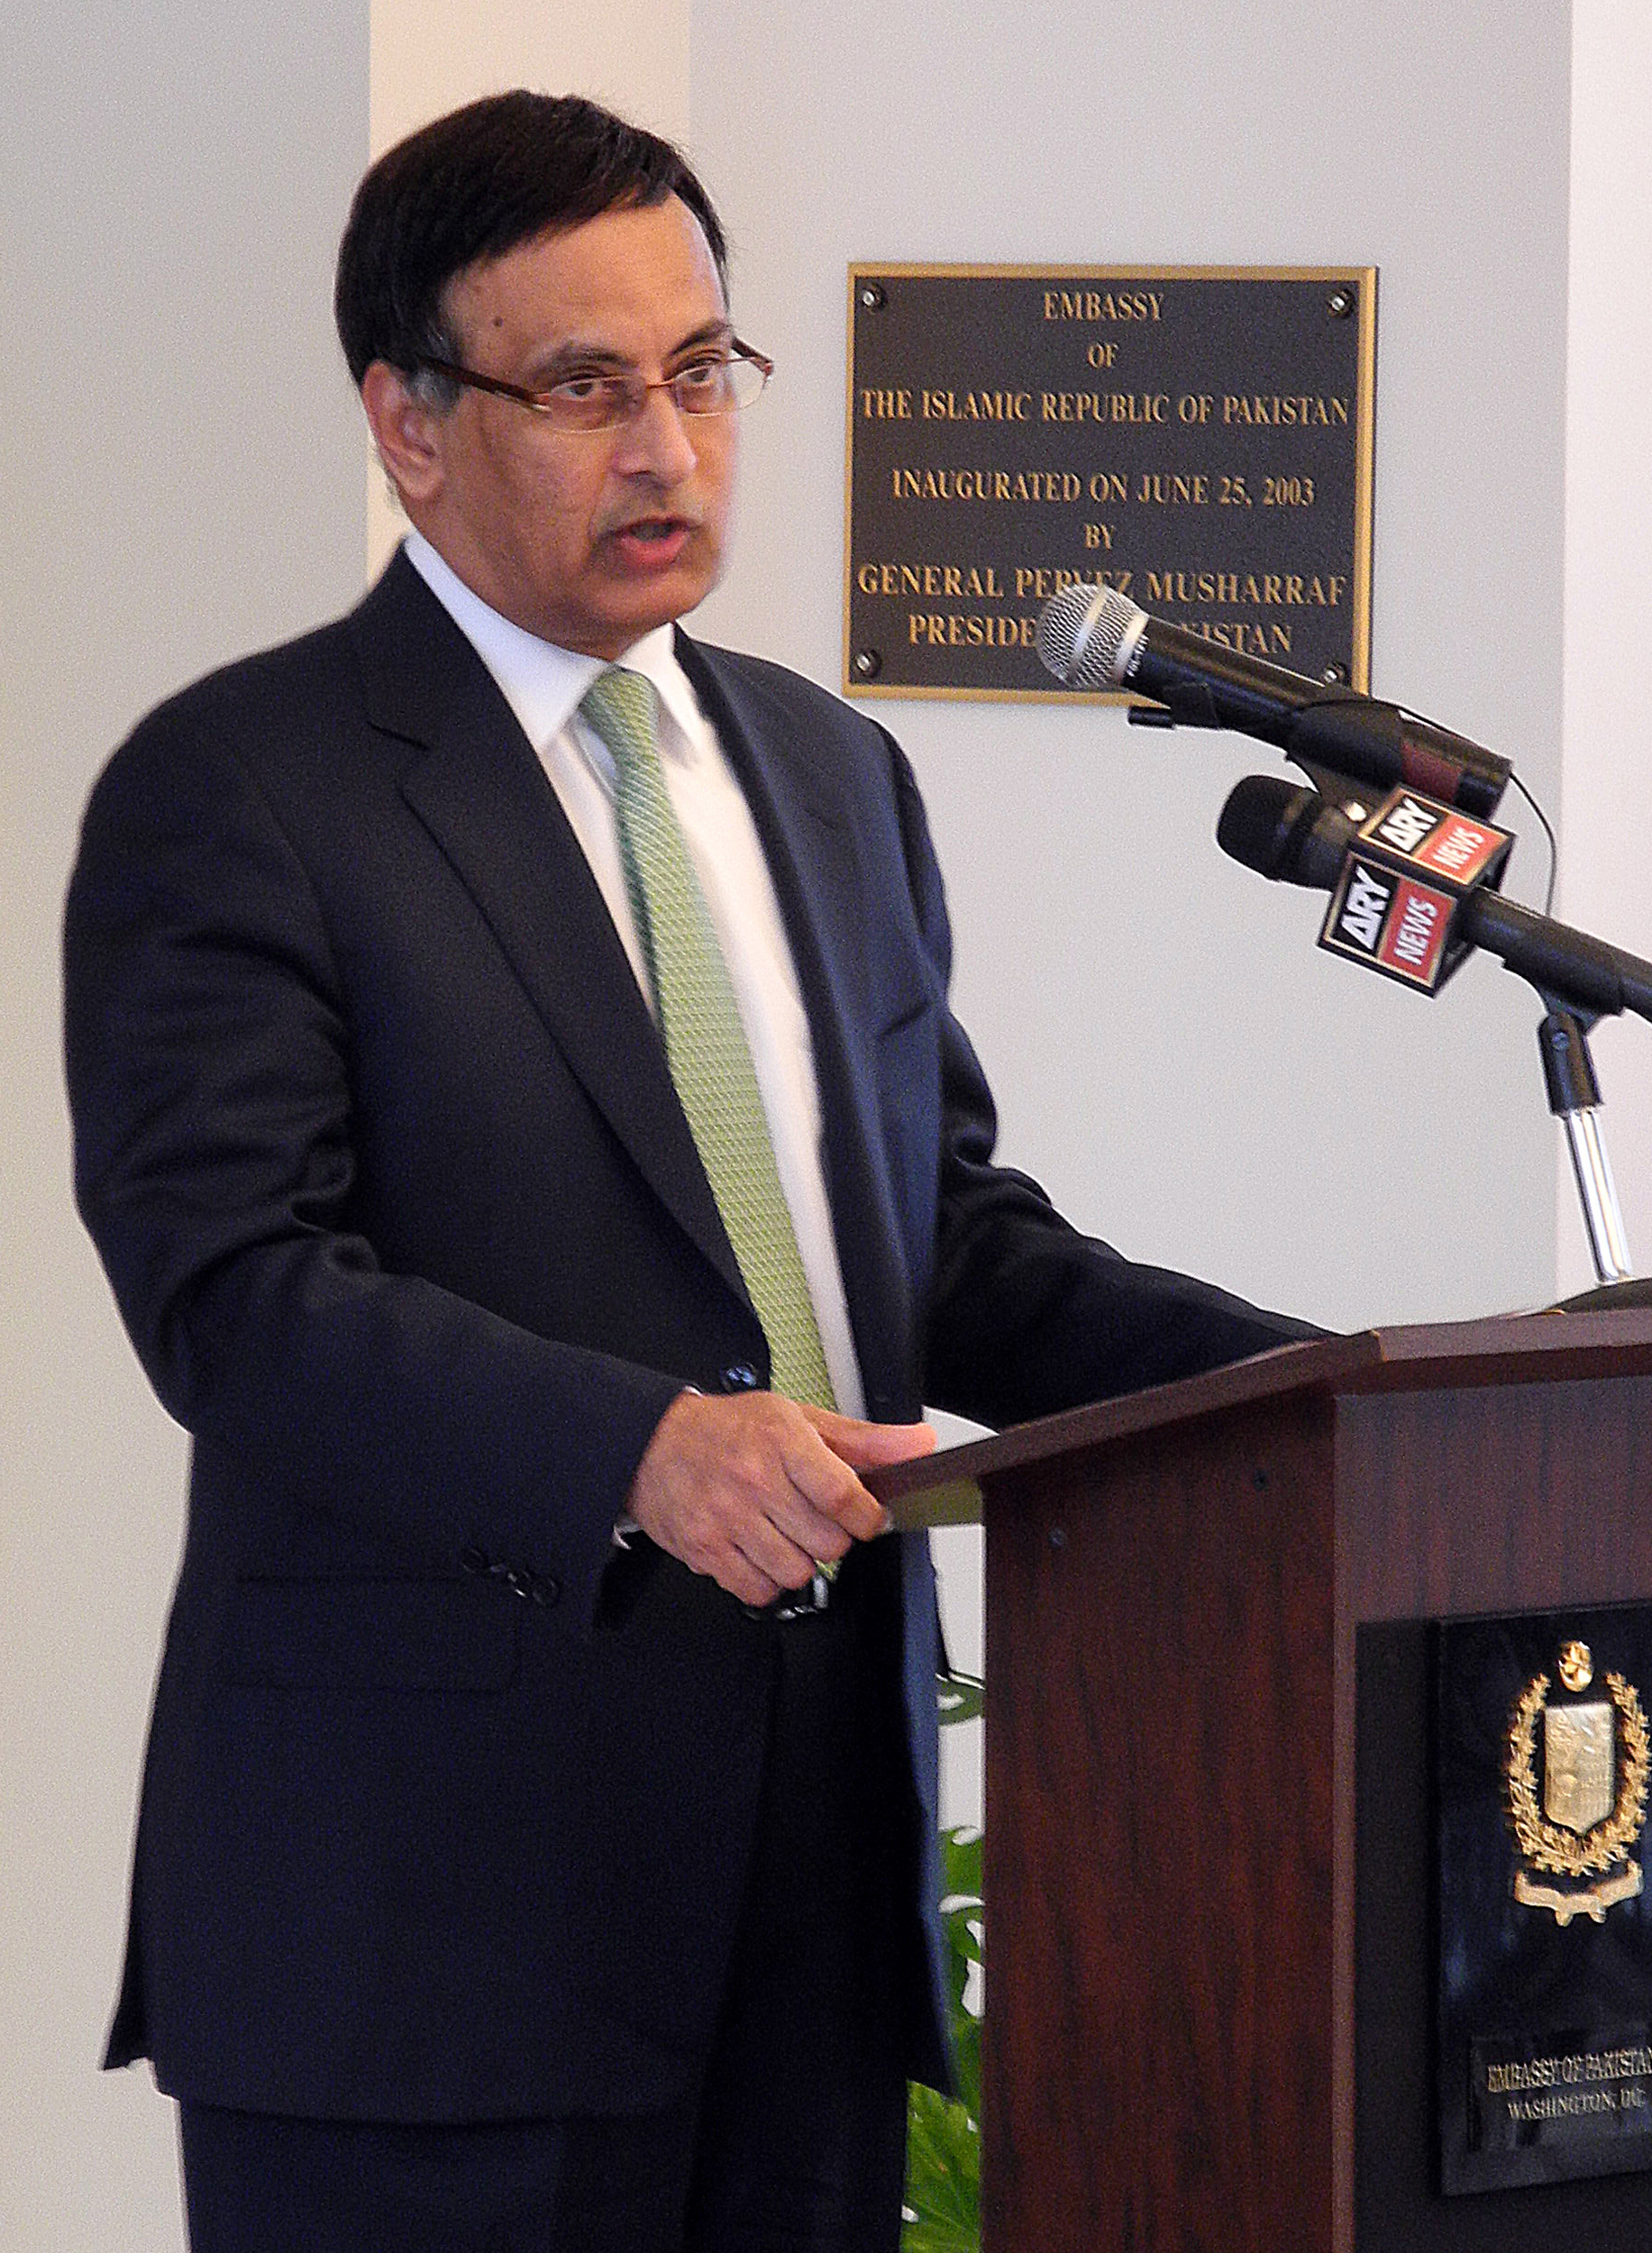 (FILES) This file photo taken on March 9, 2011 shows Pakistan's ambassador to the United States, Hussain Haqqani, addressing a memorial service in honor of slain minister for minorities Shahbaz Bhatti at the embassy in Washington. The White House said on November 22, 2011 that the resignation of Haqqani, was an "internal issue" for Pakistan but praised him as "a very close partner." Pakistan's government said earlier that it had asked Haqqani to resign and ordered a probe into claims that he sought American help against the country's powerful military. AFP PHOTO / FILES / SHAUN TANDON